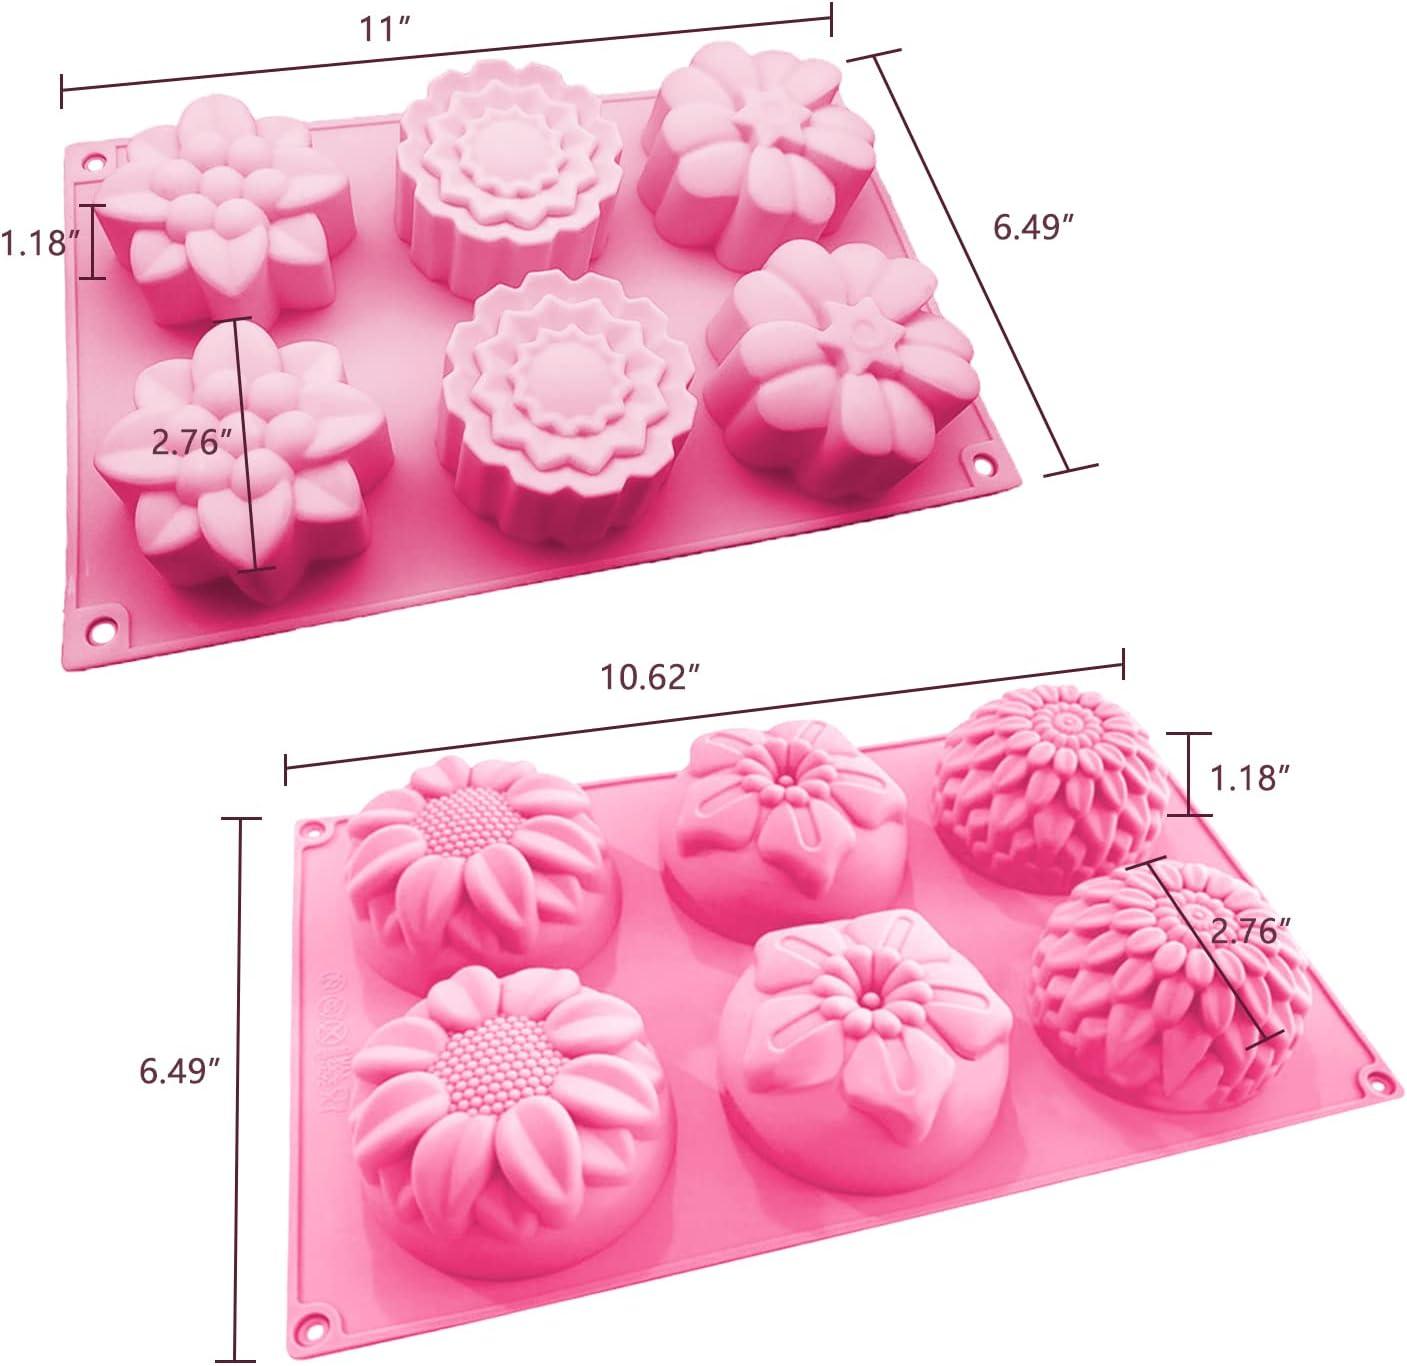 2 Pack Silicone Soap Molds, 6 Cavities Silicone Baking Mold Cake